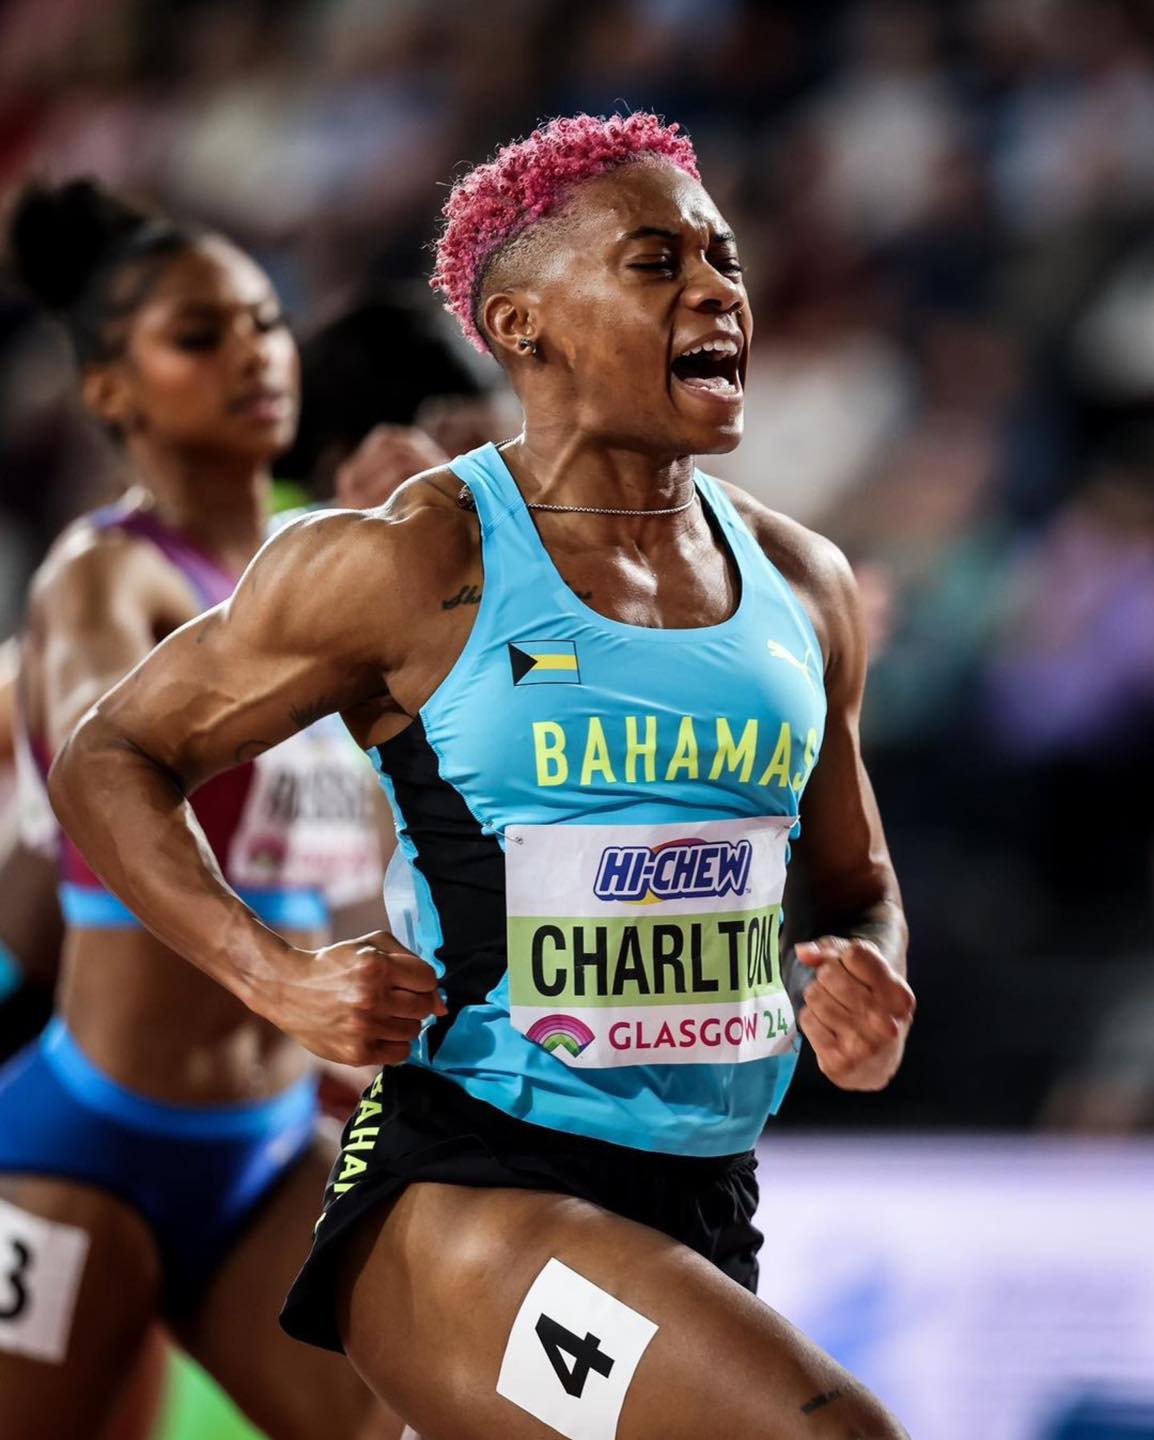 Devynne Charlton Sets New World Record in 60m Hurdles, Claims First Global Title